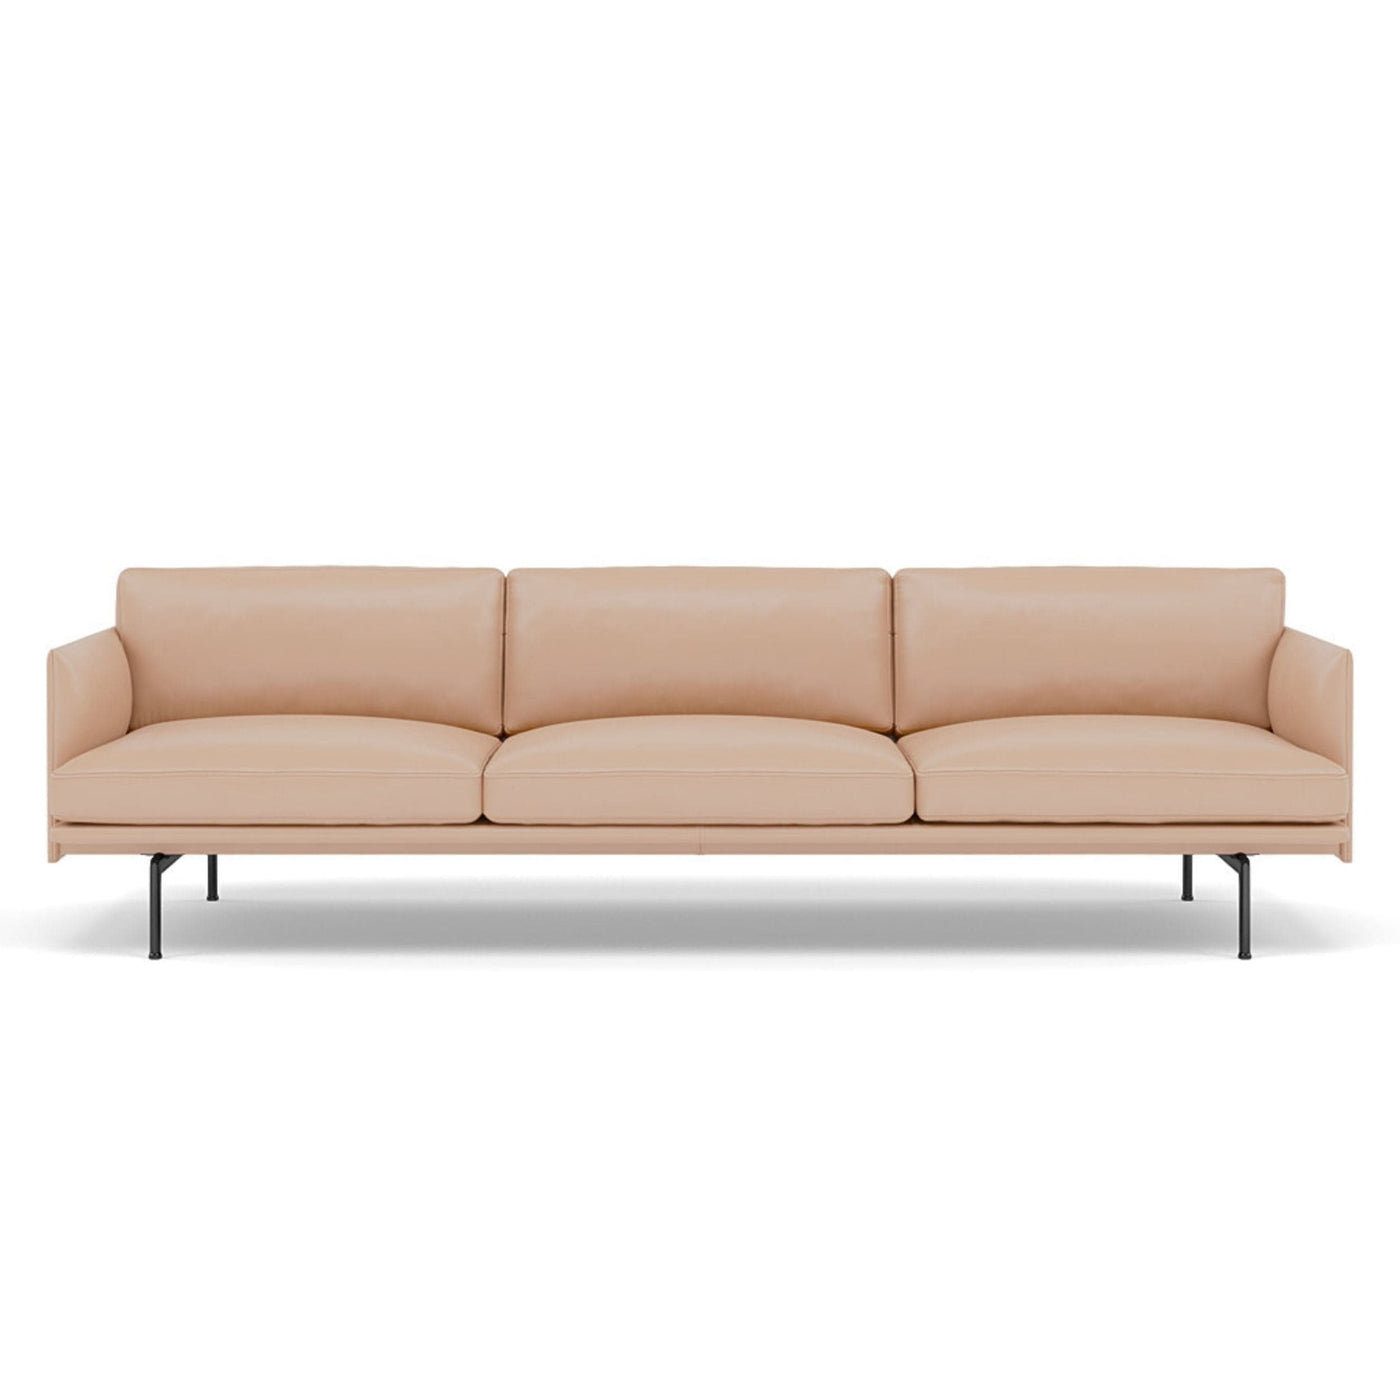 muuto outline 3.5 seater sofa in beige refine leather and black legs. Made to order from someday designs. #colour_beige-refine-leather